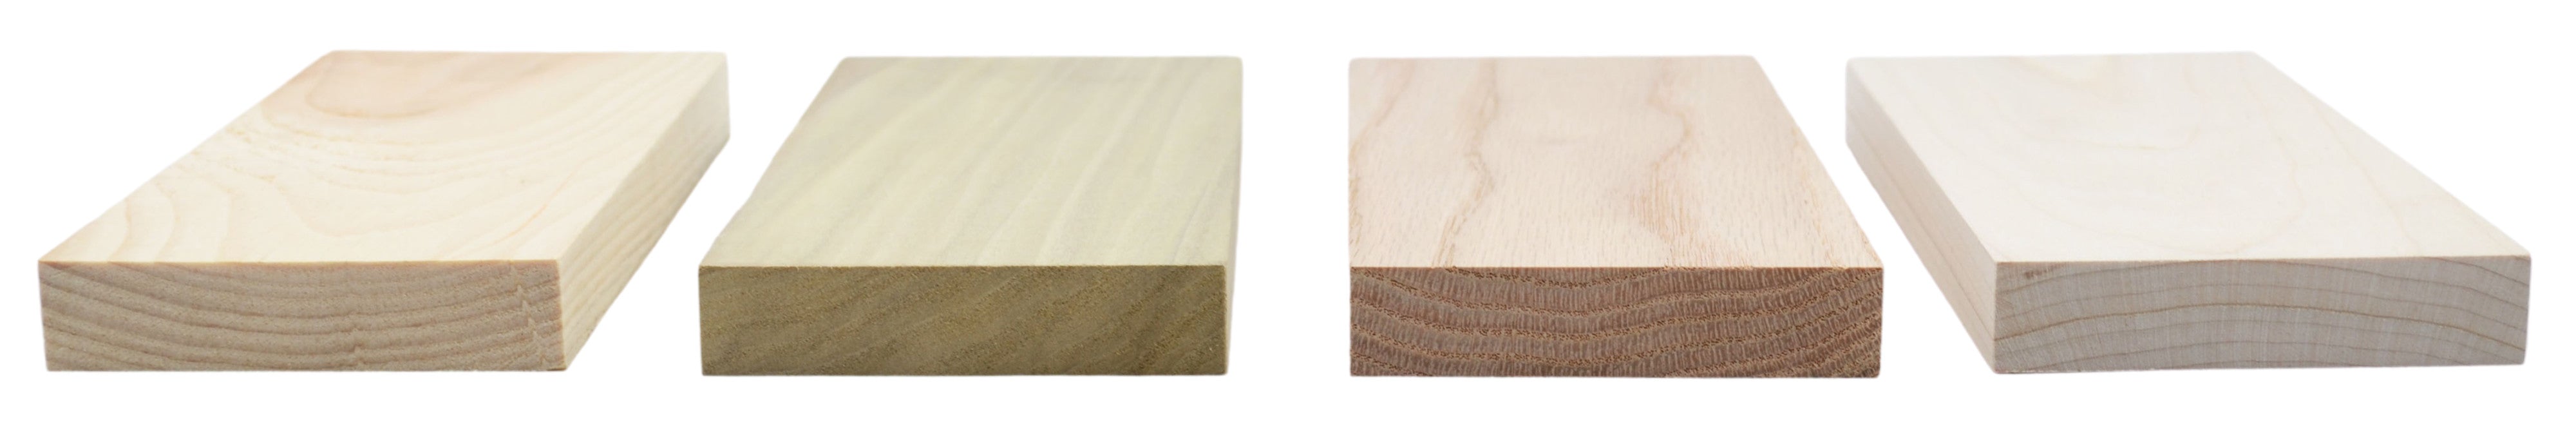 4PK Wooden Boards, 8 Inch - For Use in Density & Hardness Experiments - Poplar, Oak, Pine & Maple - Eisco Labs